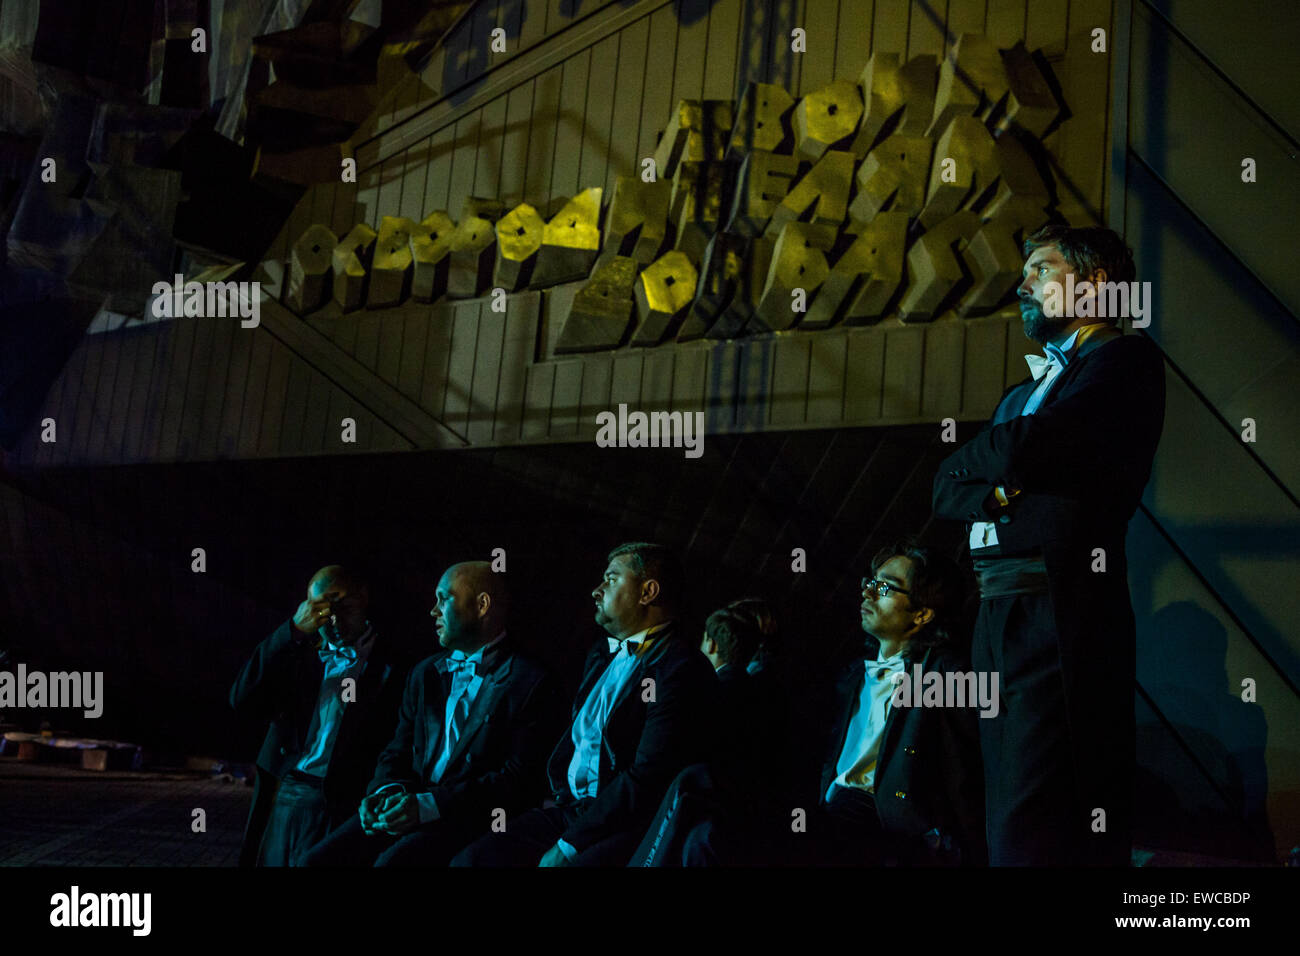 Donetsk, Donetsk oblast, Ukraine. 22nd June, 2015. Choir members waiting for their performance under the main entrance of the War Museum of Donbass during the concert of the famous pianist Valentina Lisitsa in Donetsk, Ukraine. © Celestino Arce/ZUMA Wire/ZUMAPRESS.com/Alamy Live News Stock Photo